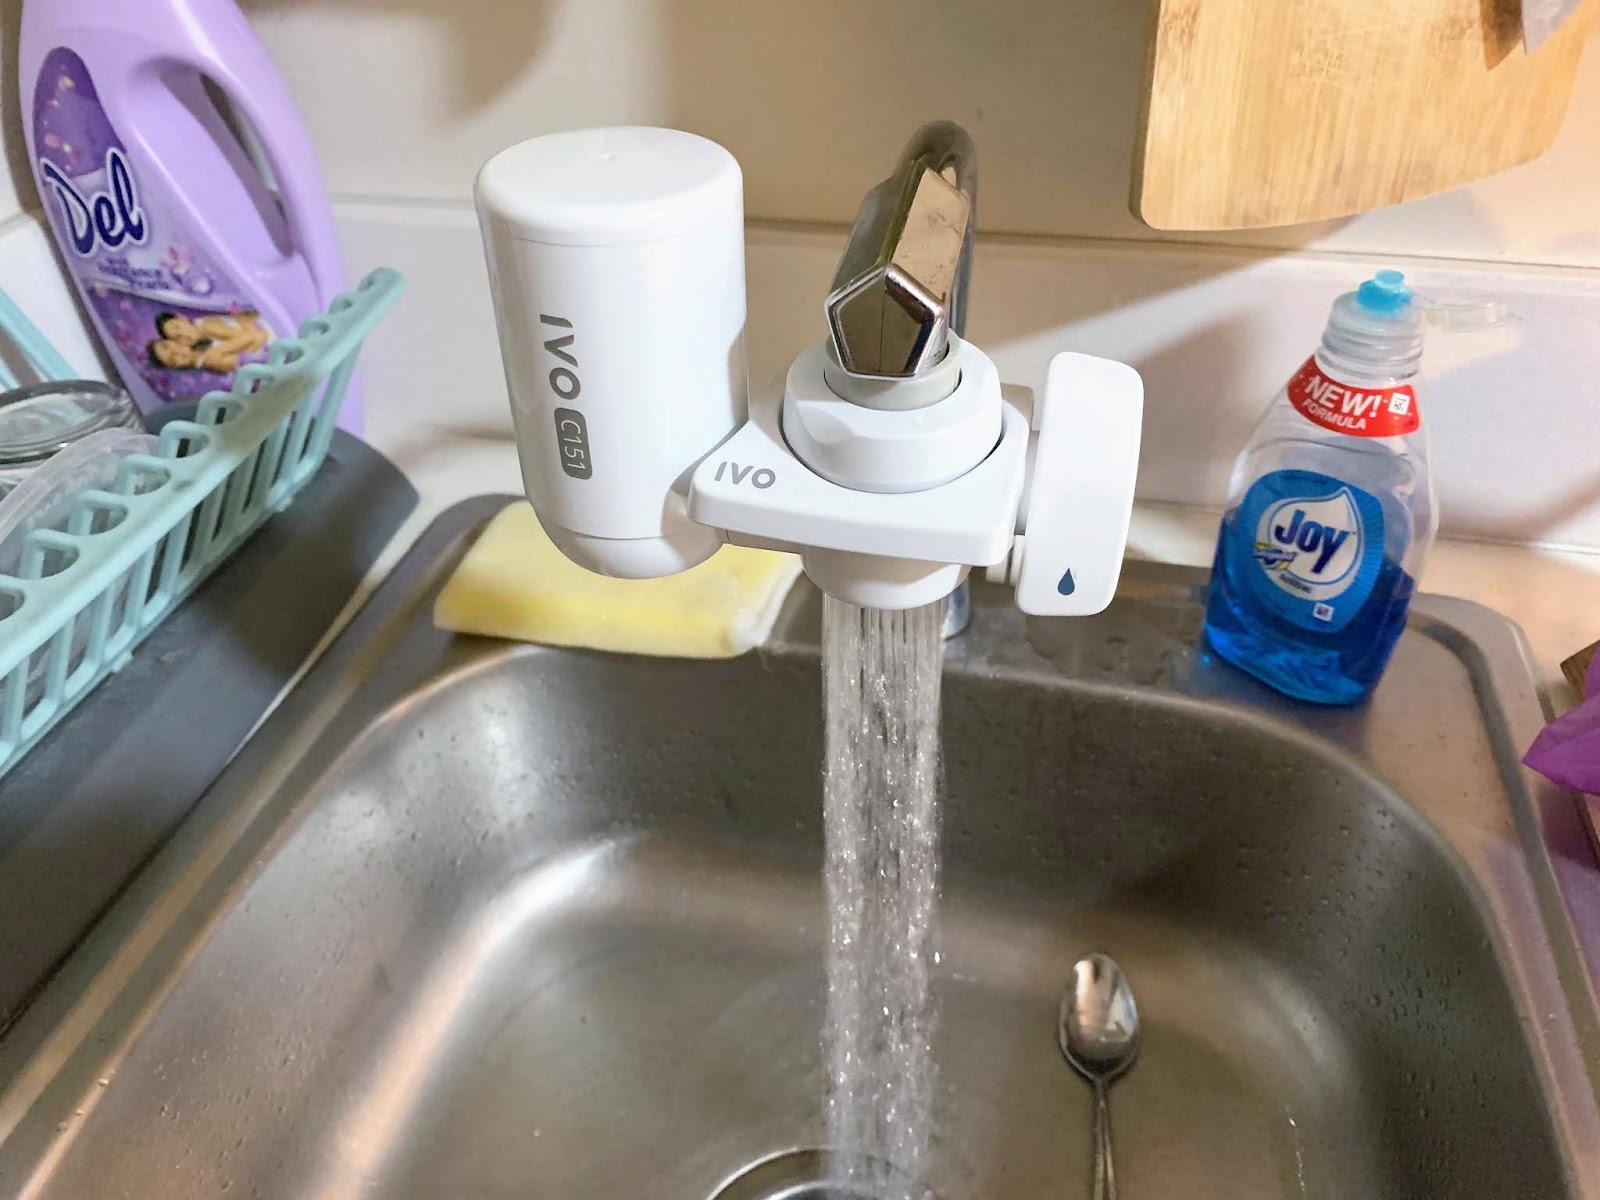 [Review] IVO C151 Faucet-mounted water purifier - The Blahger